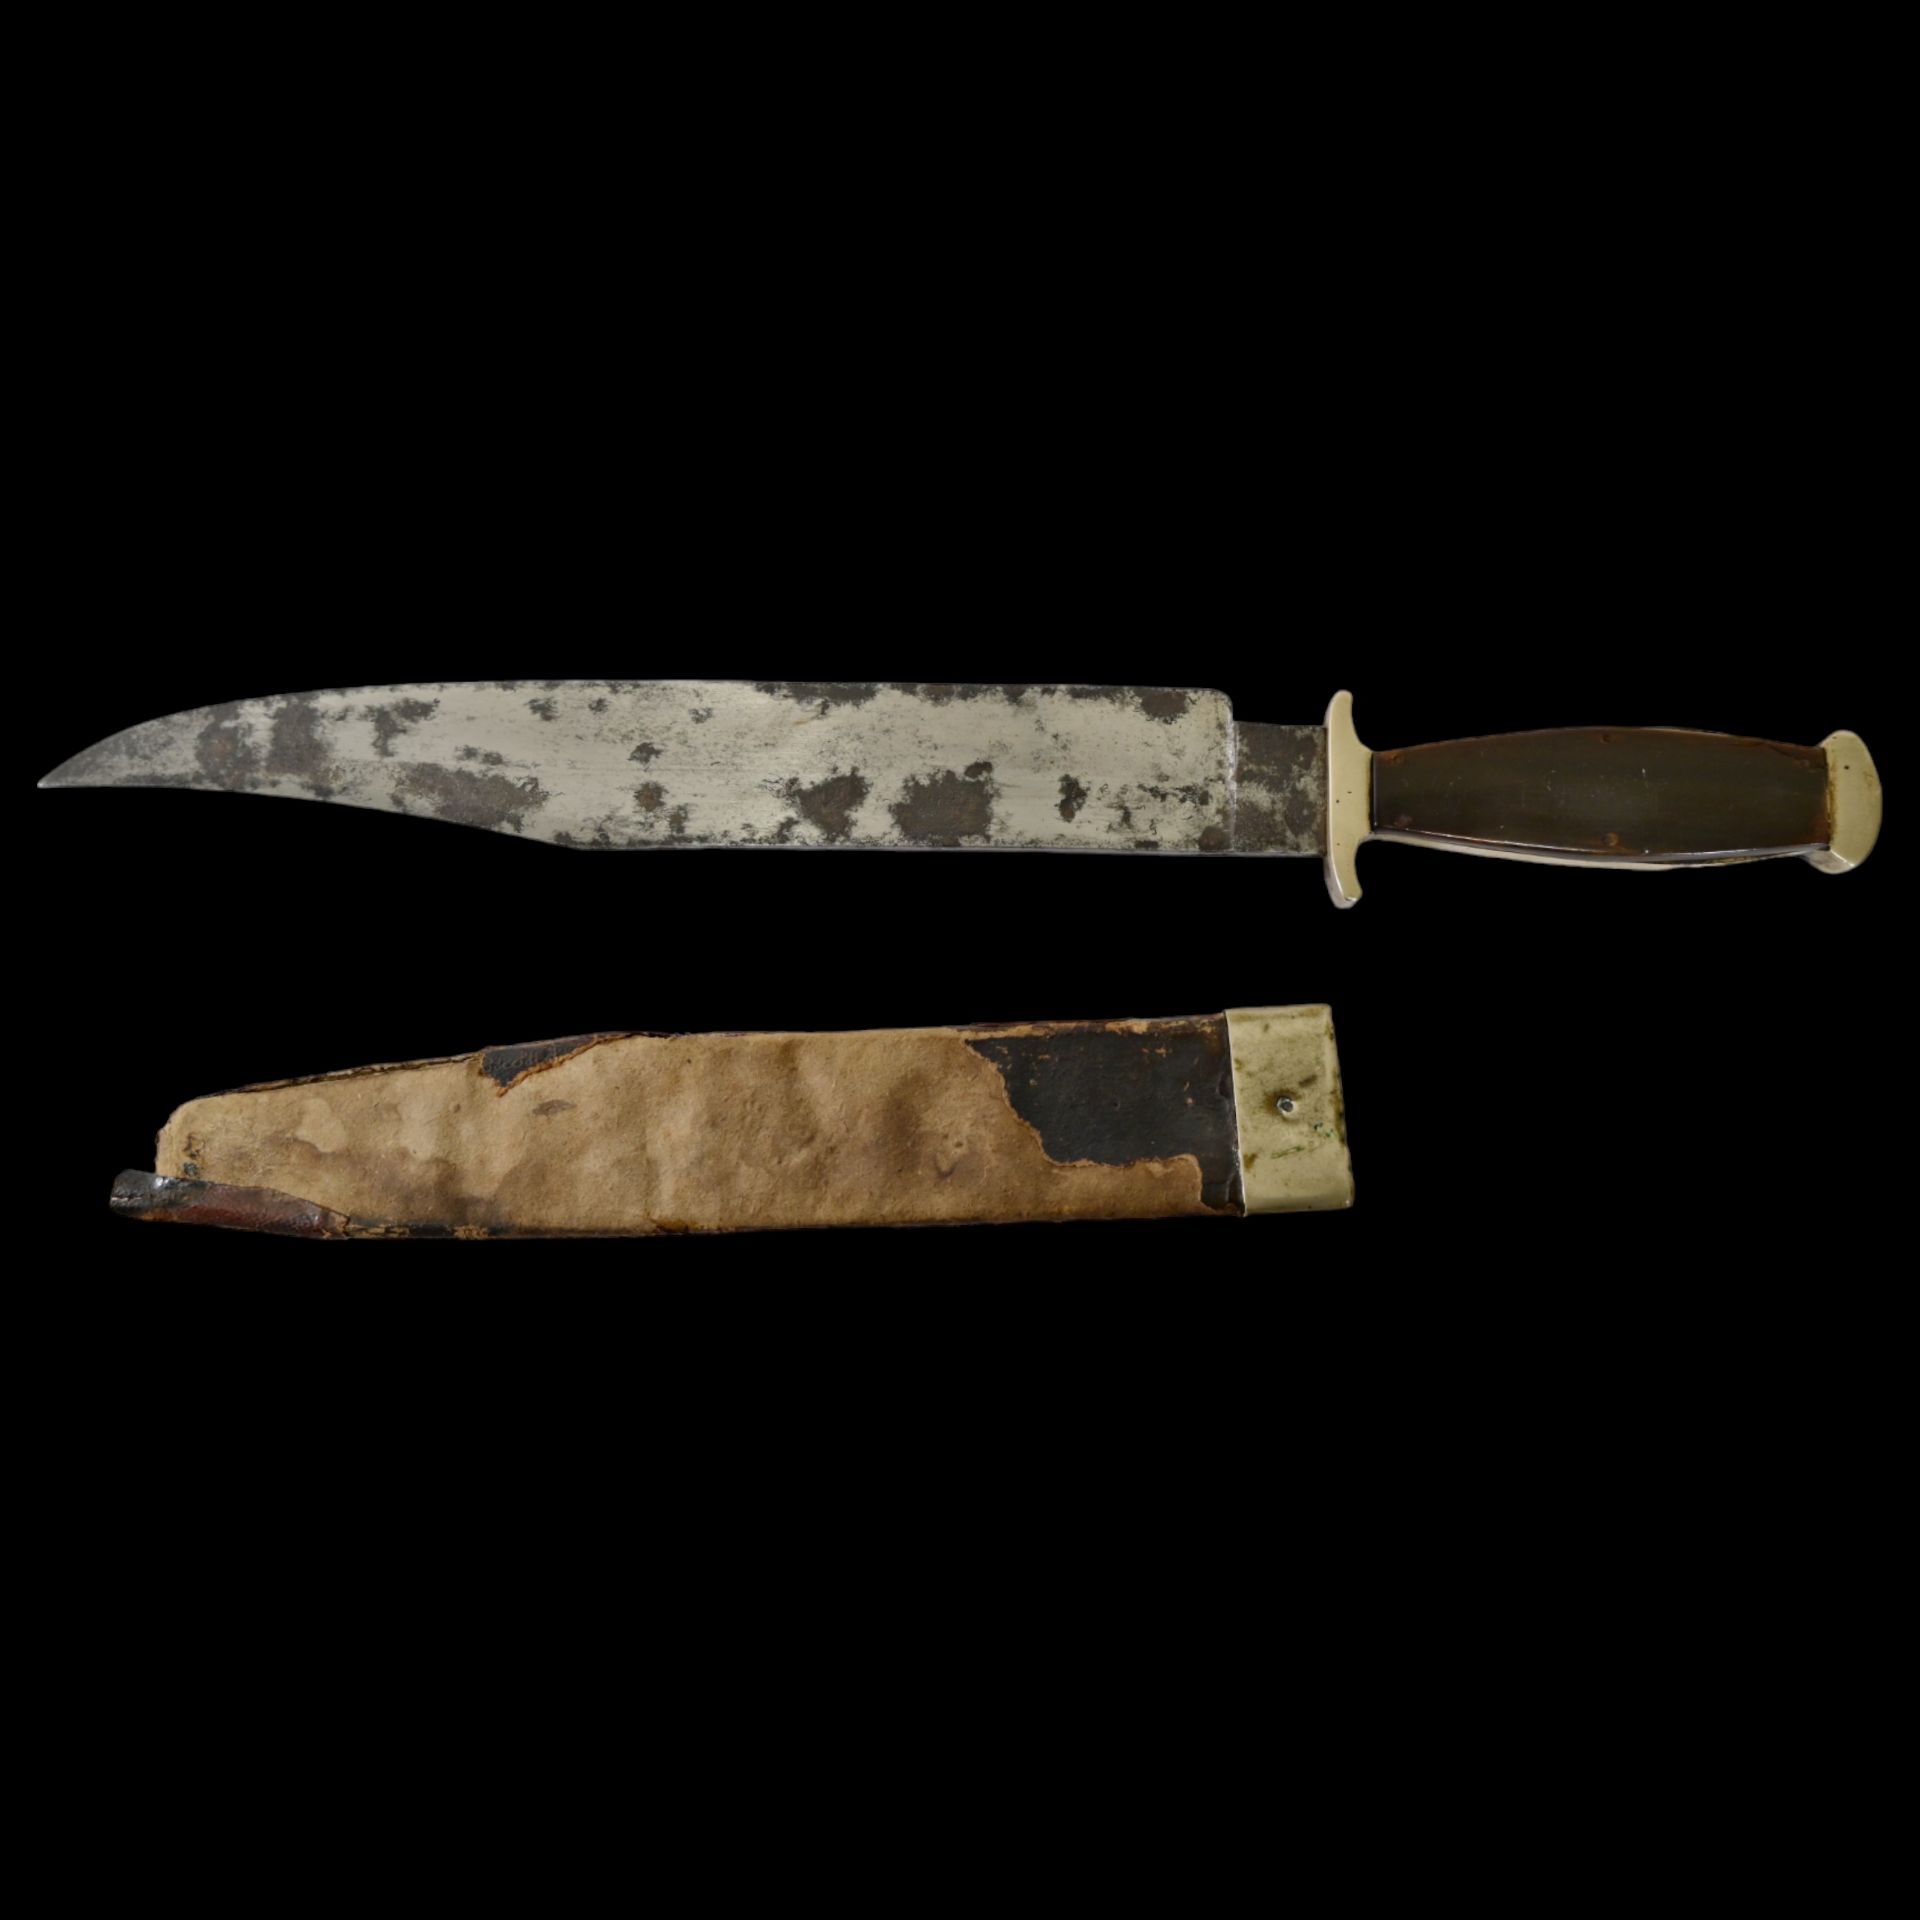 Extra rare and very early Bowie knife of American Gold Miners "Gold Seekers Protector", 1820-30s. - Image 8 of 10